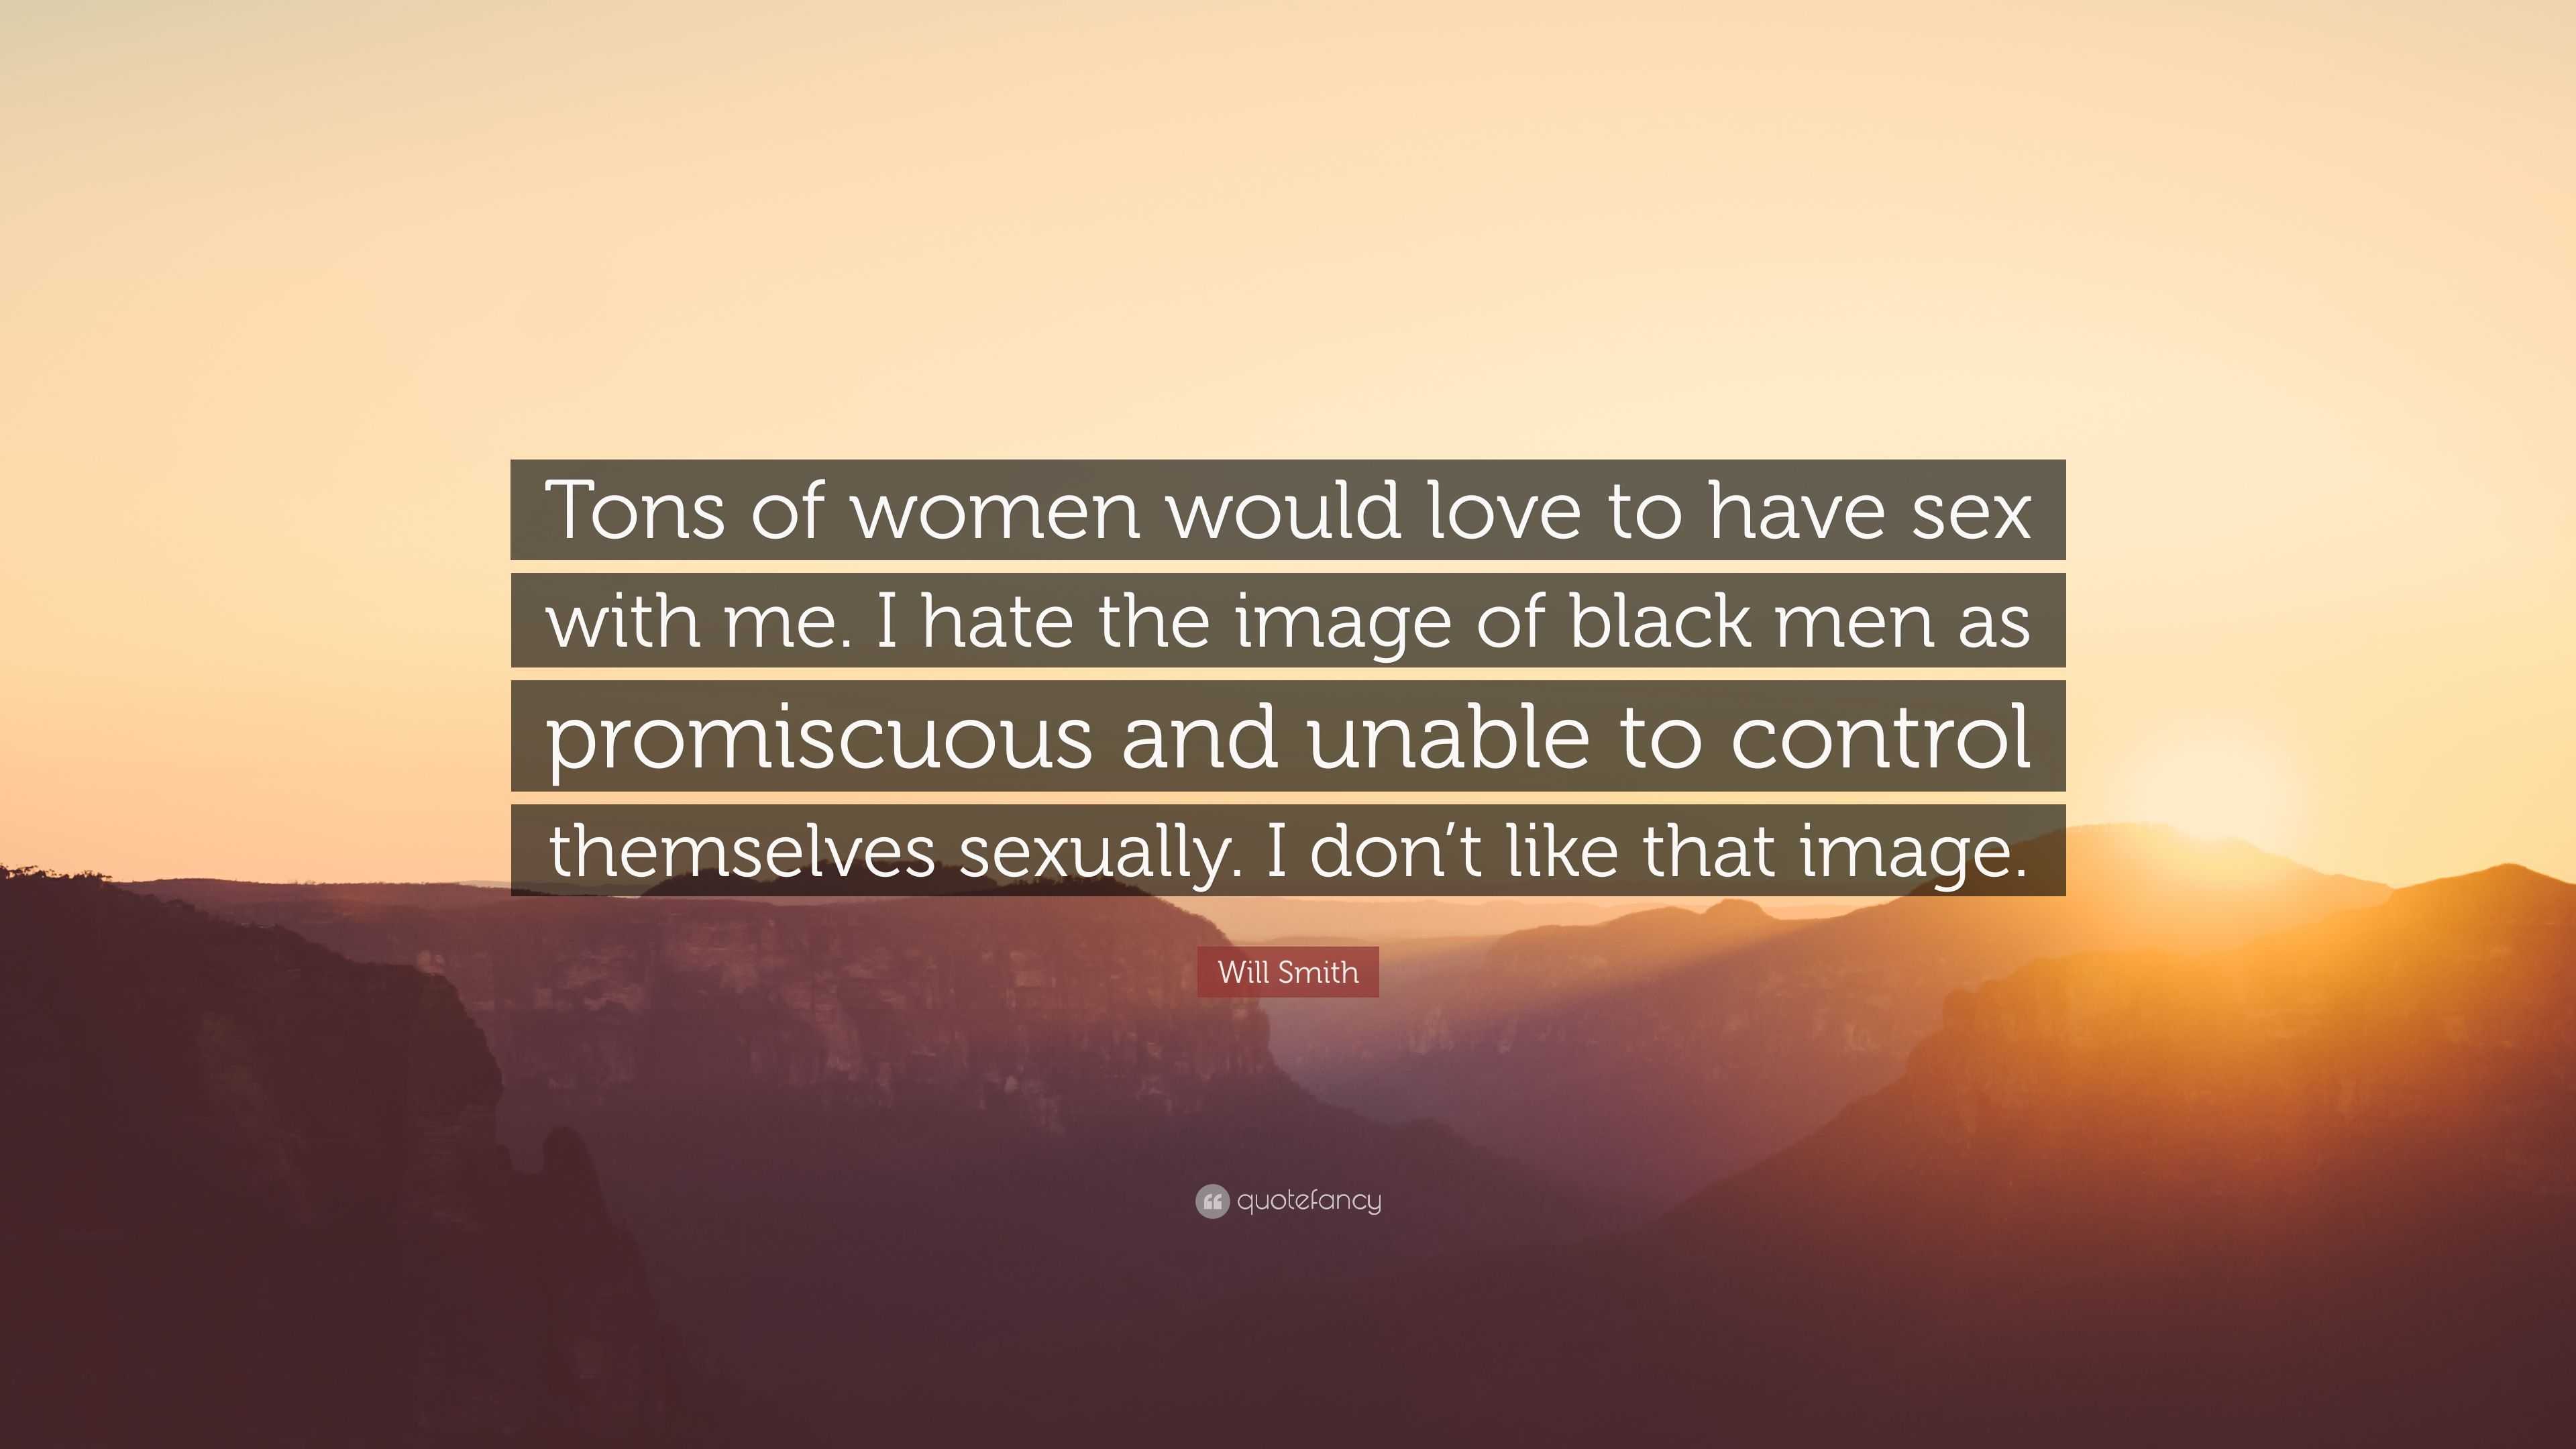 Will Smith Quote “Tons of women would love to have sex with me picture pic